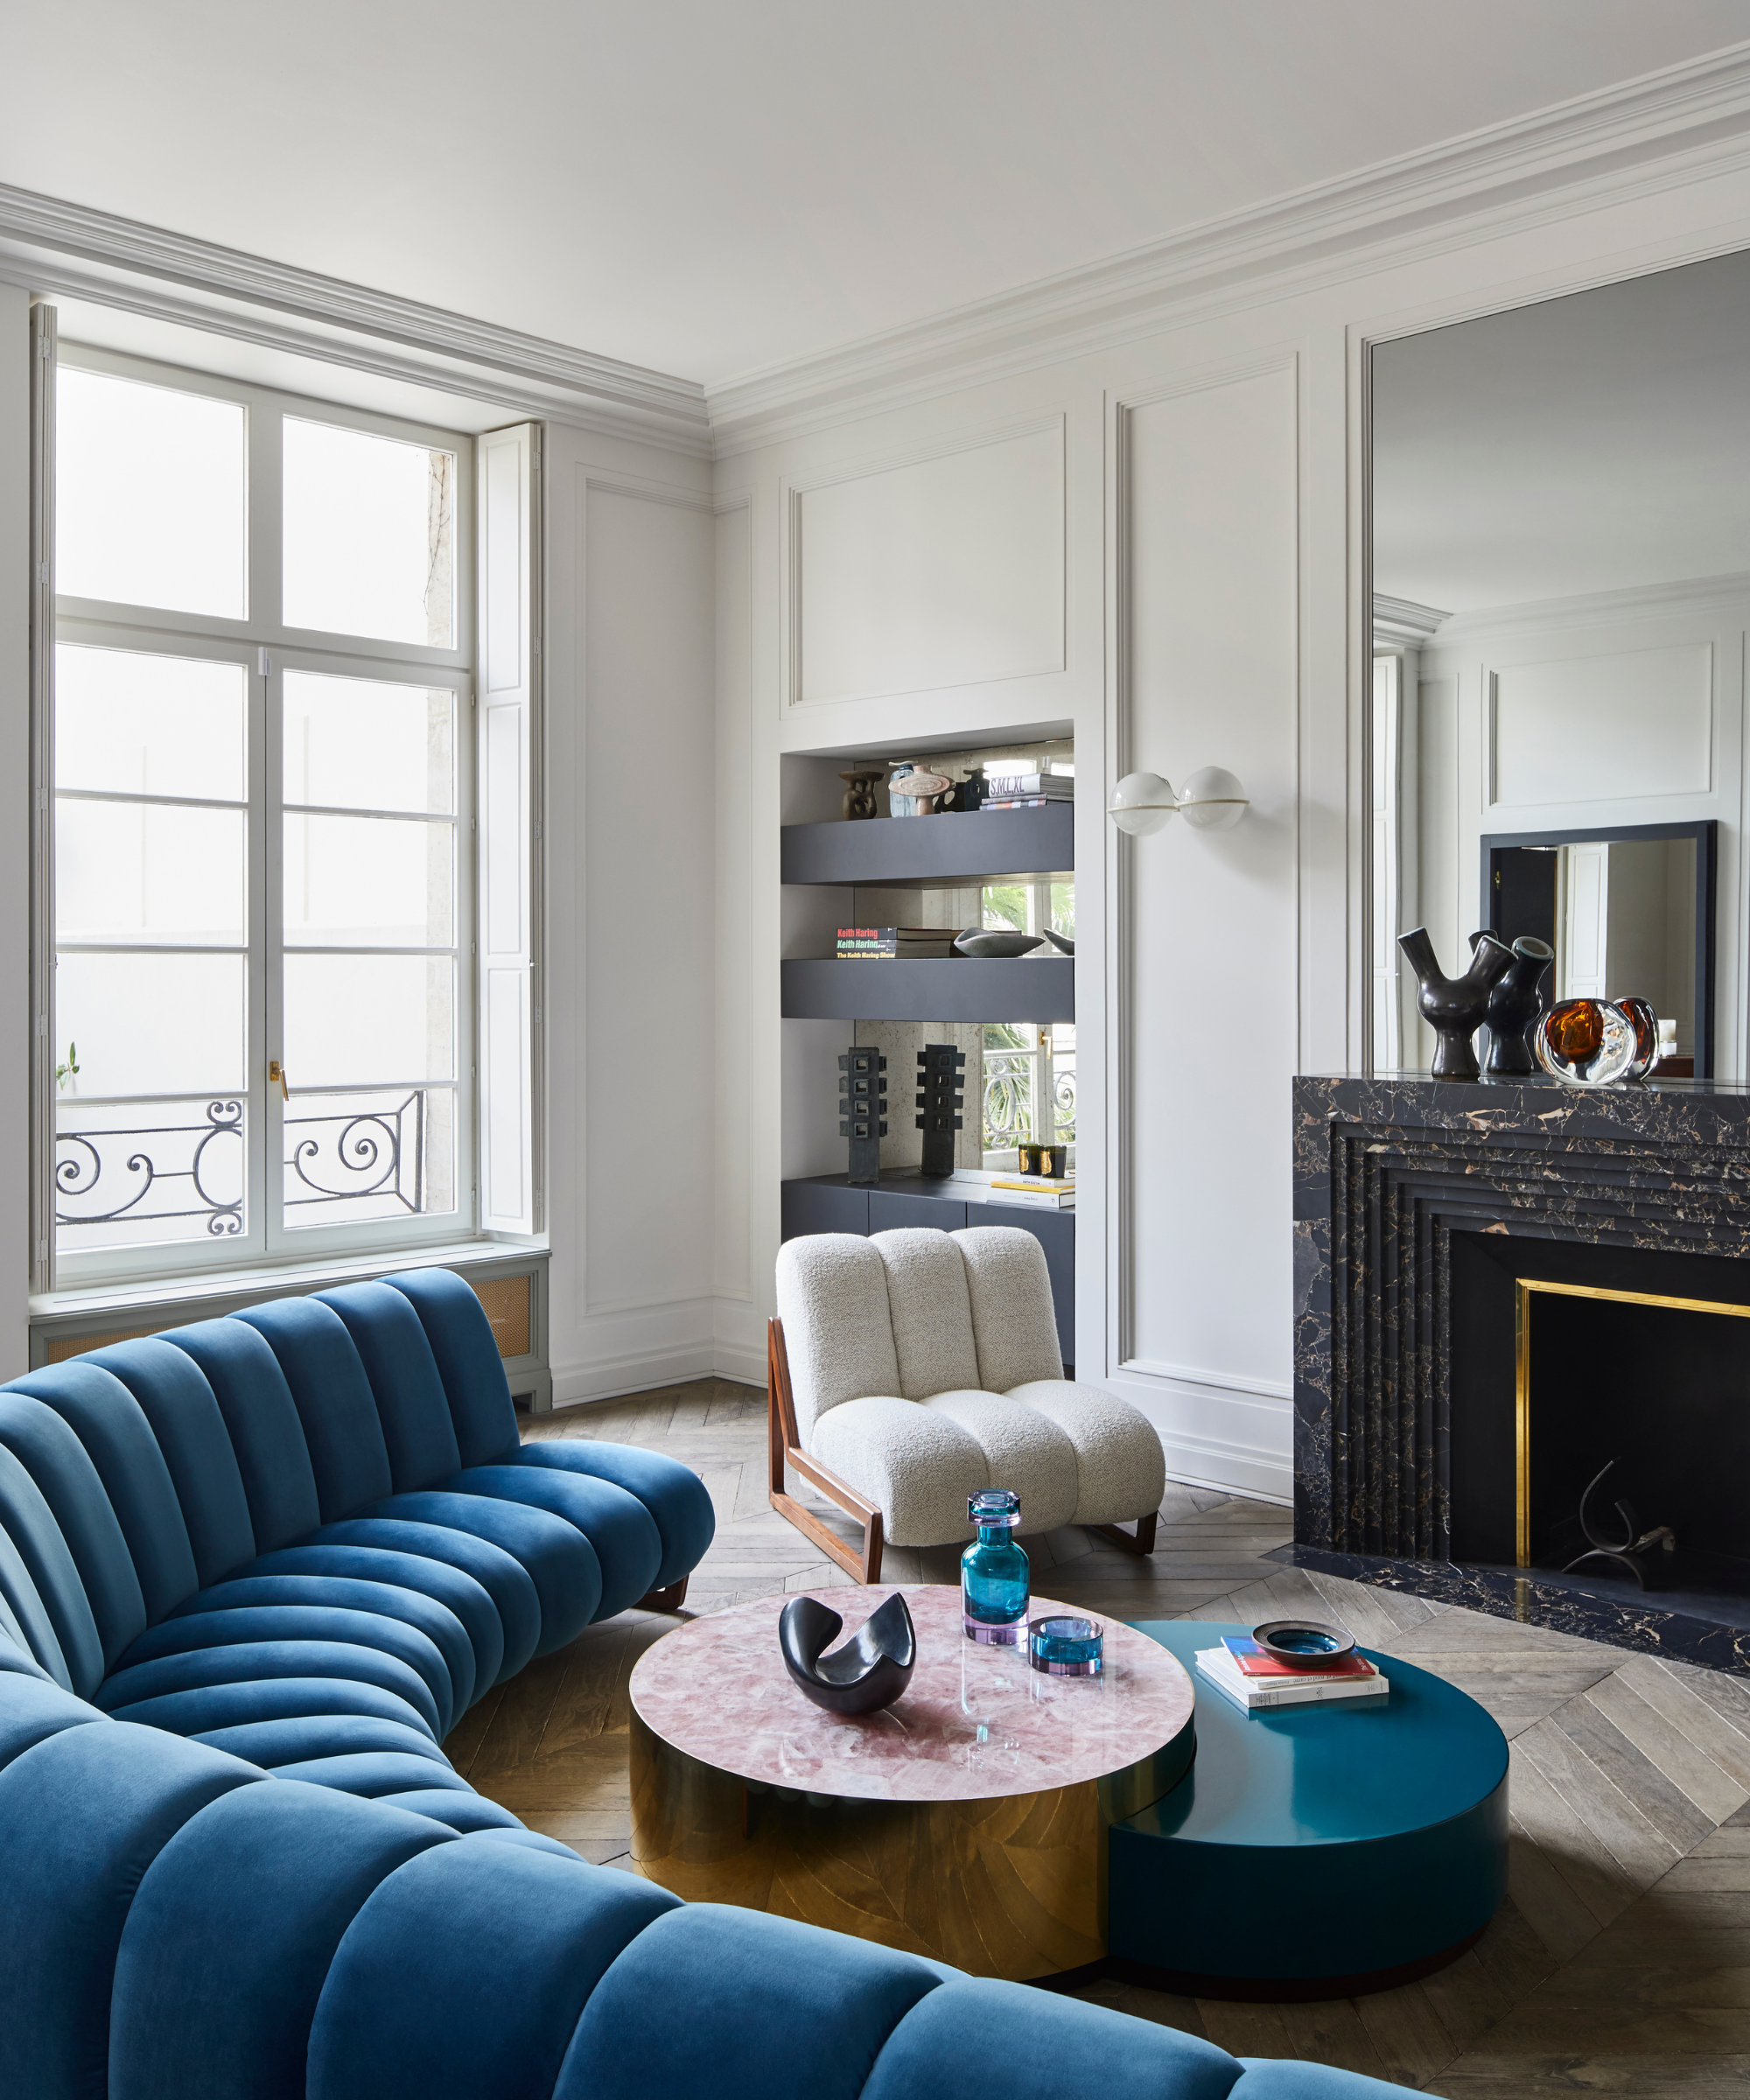 Curved petrol blue tufted couch in modern living room with white armchair in front of statement fireplace